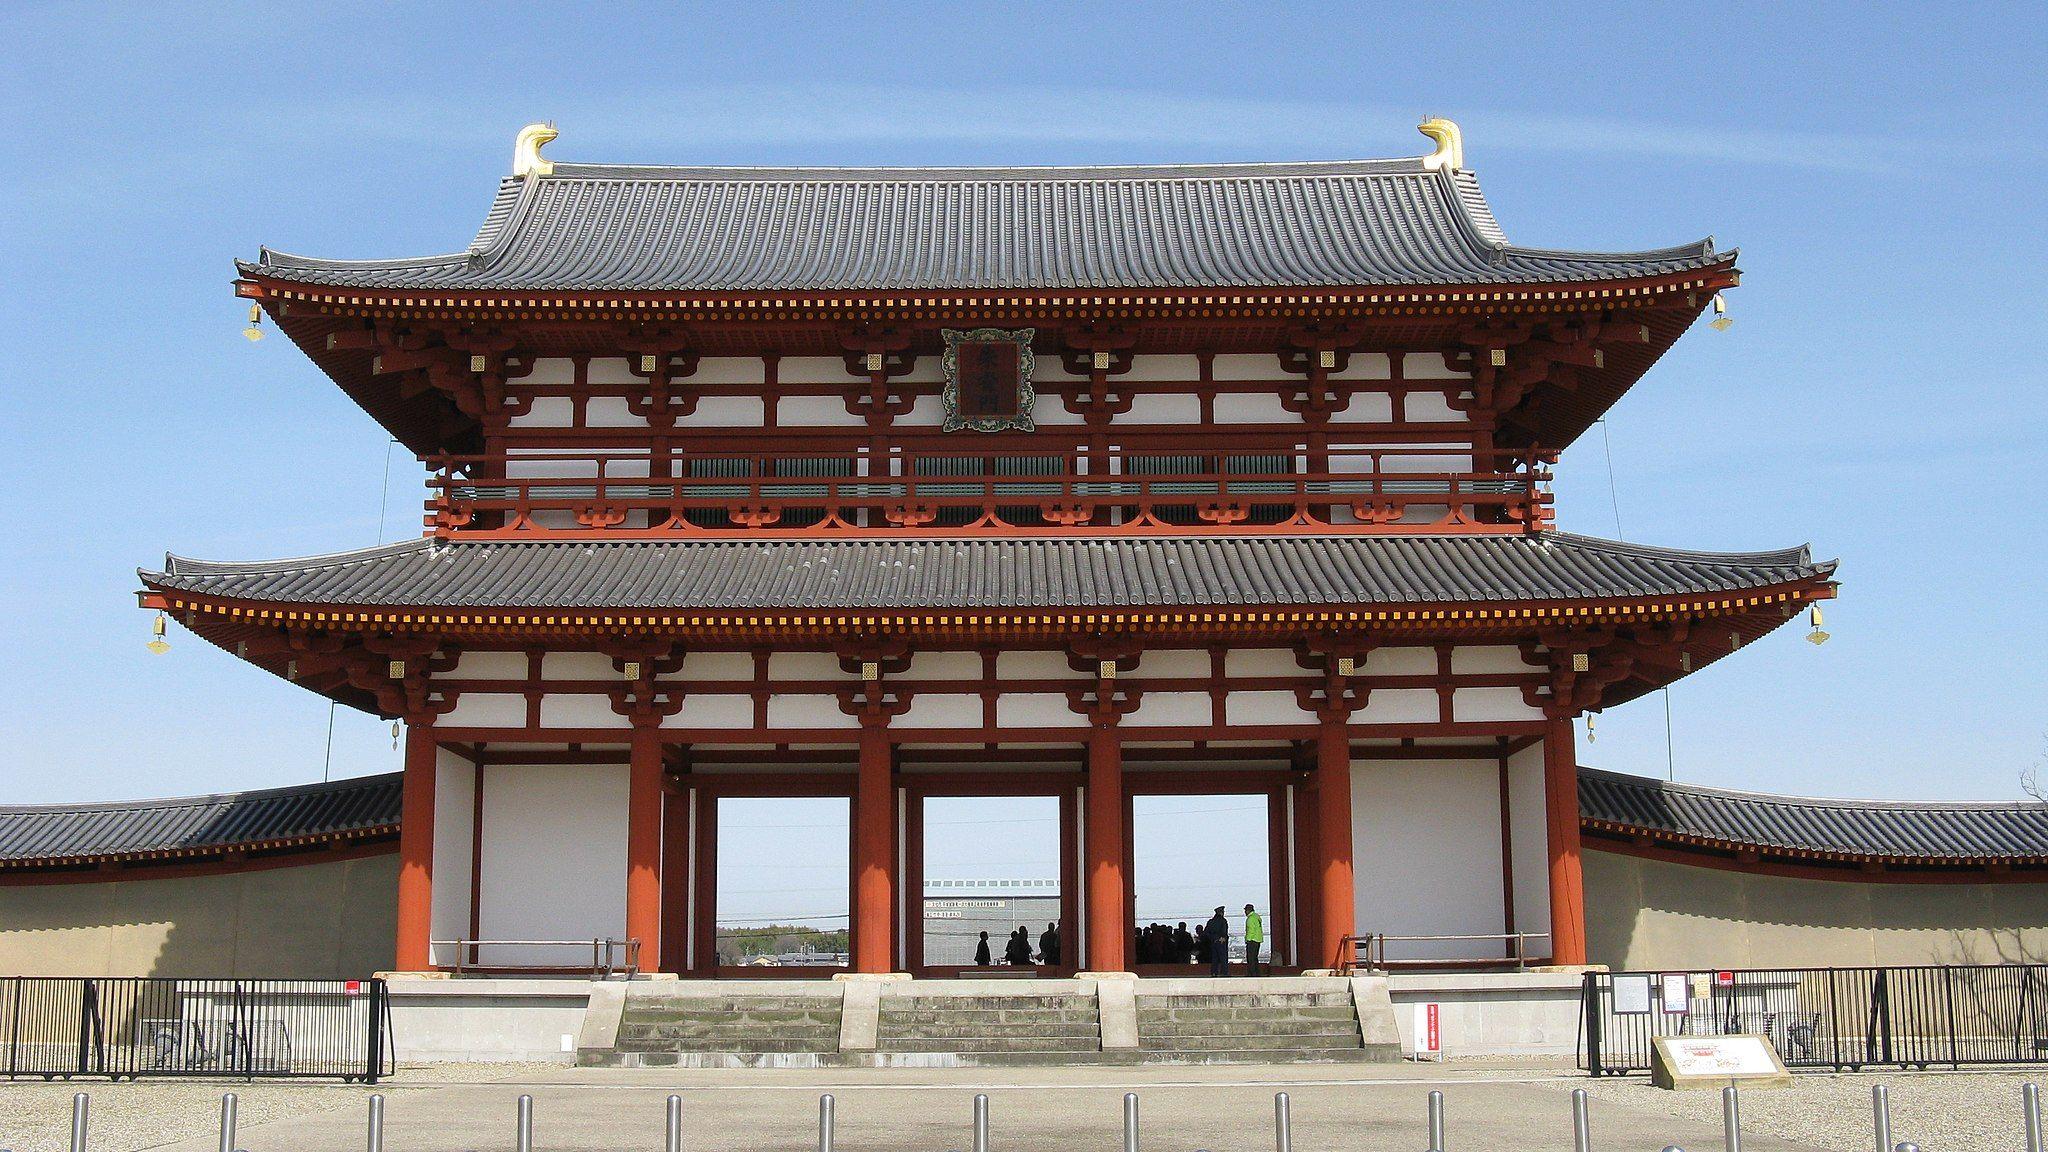 The Suzaku Gate is the main entrance to the palace